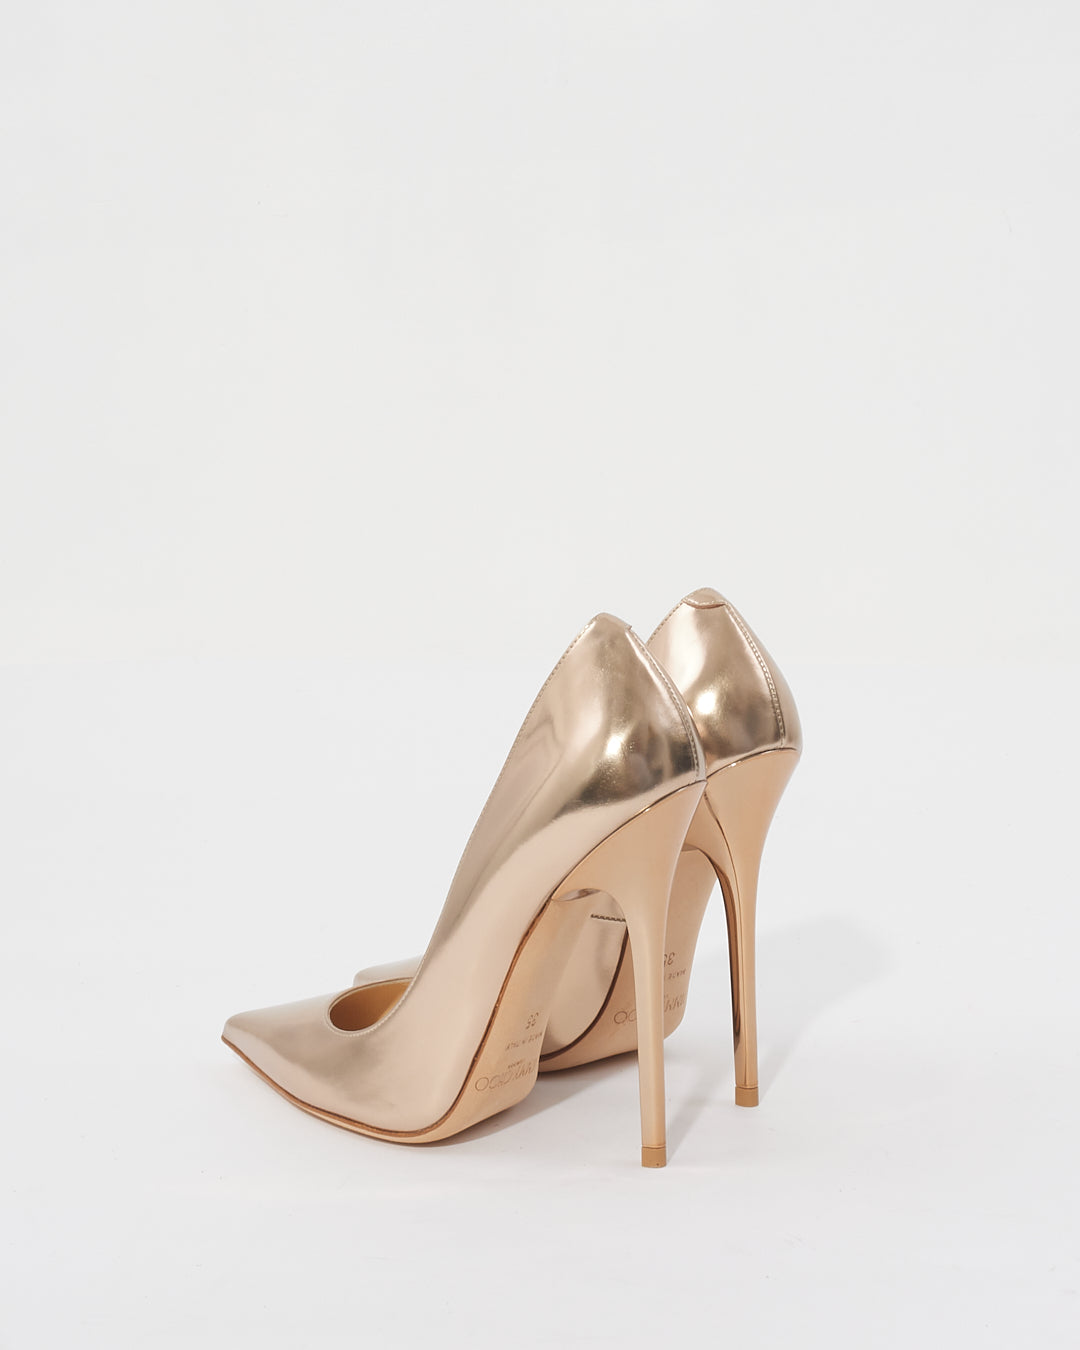 Jimmy Choo Gold Anouk Pointed Toe Pumps - 35